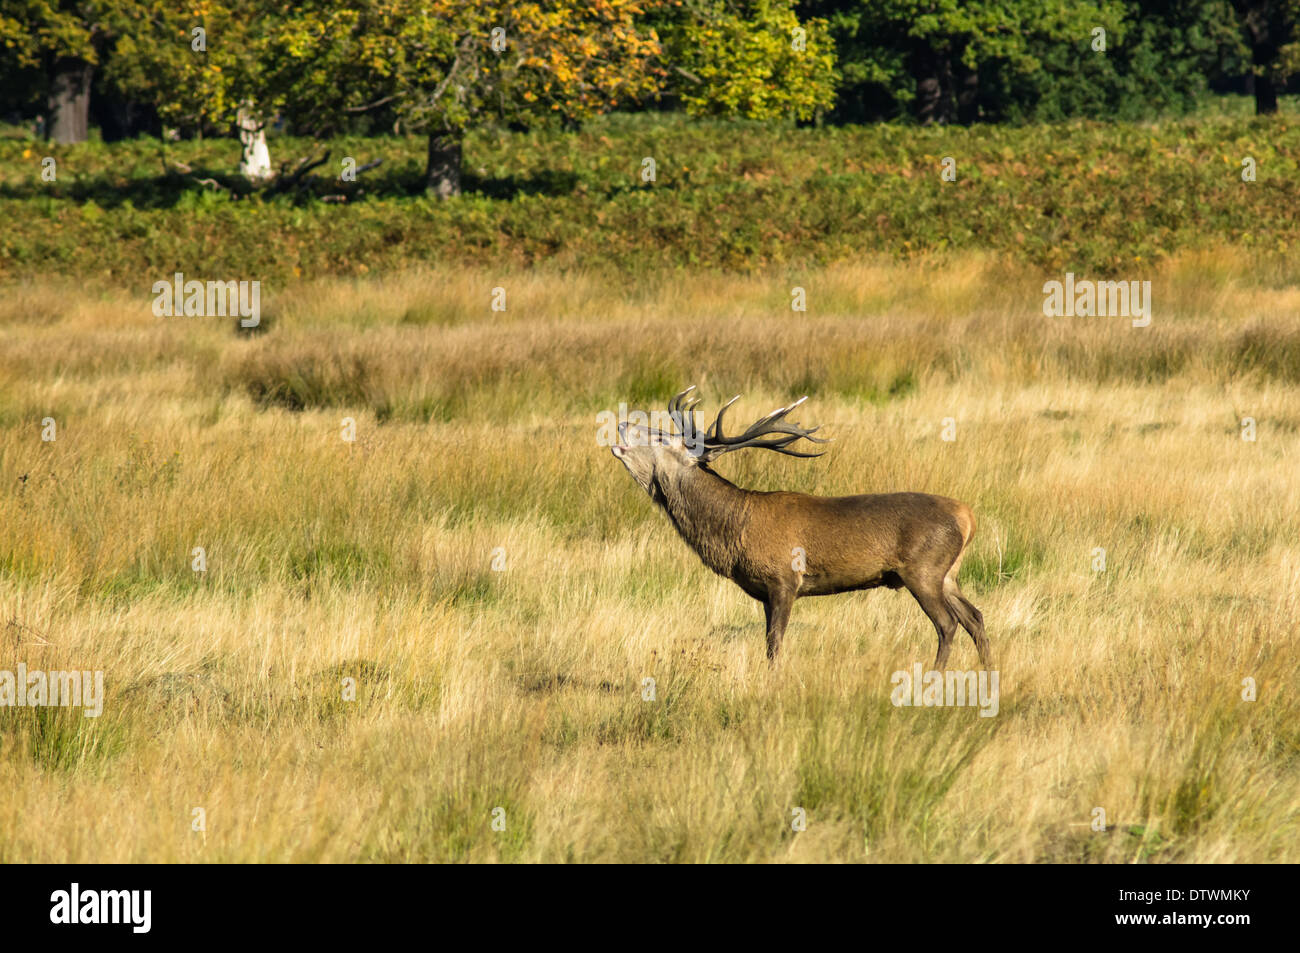 deer with large antlers roaring in a forest Stock Photo